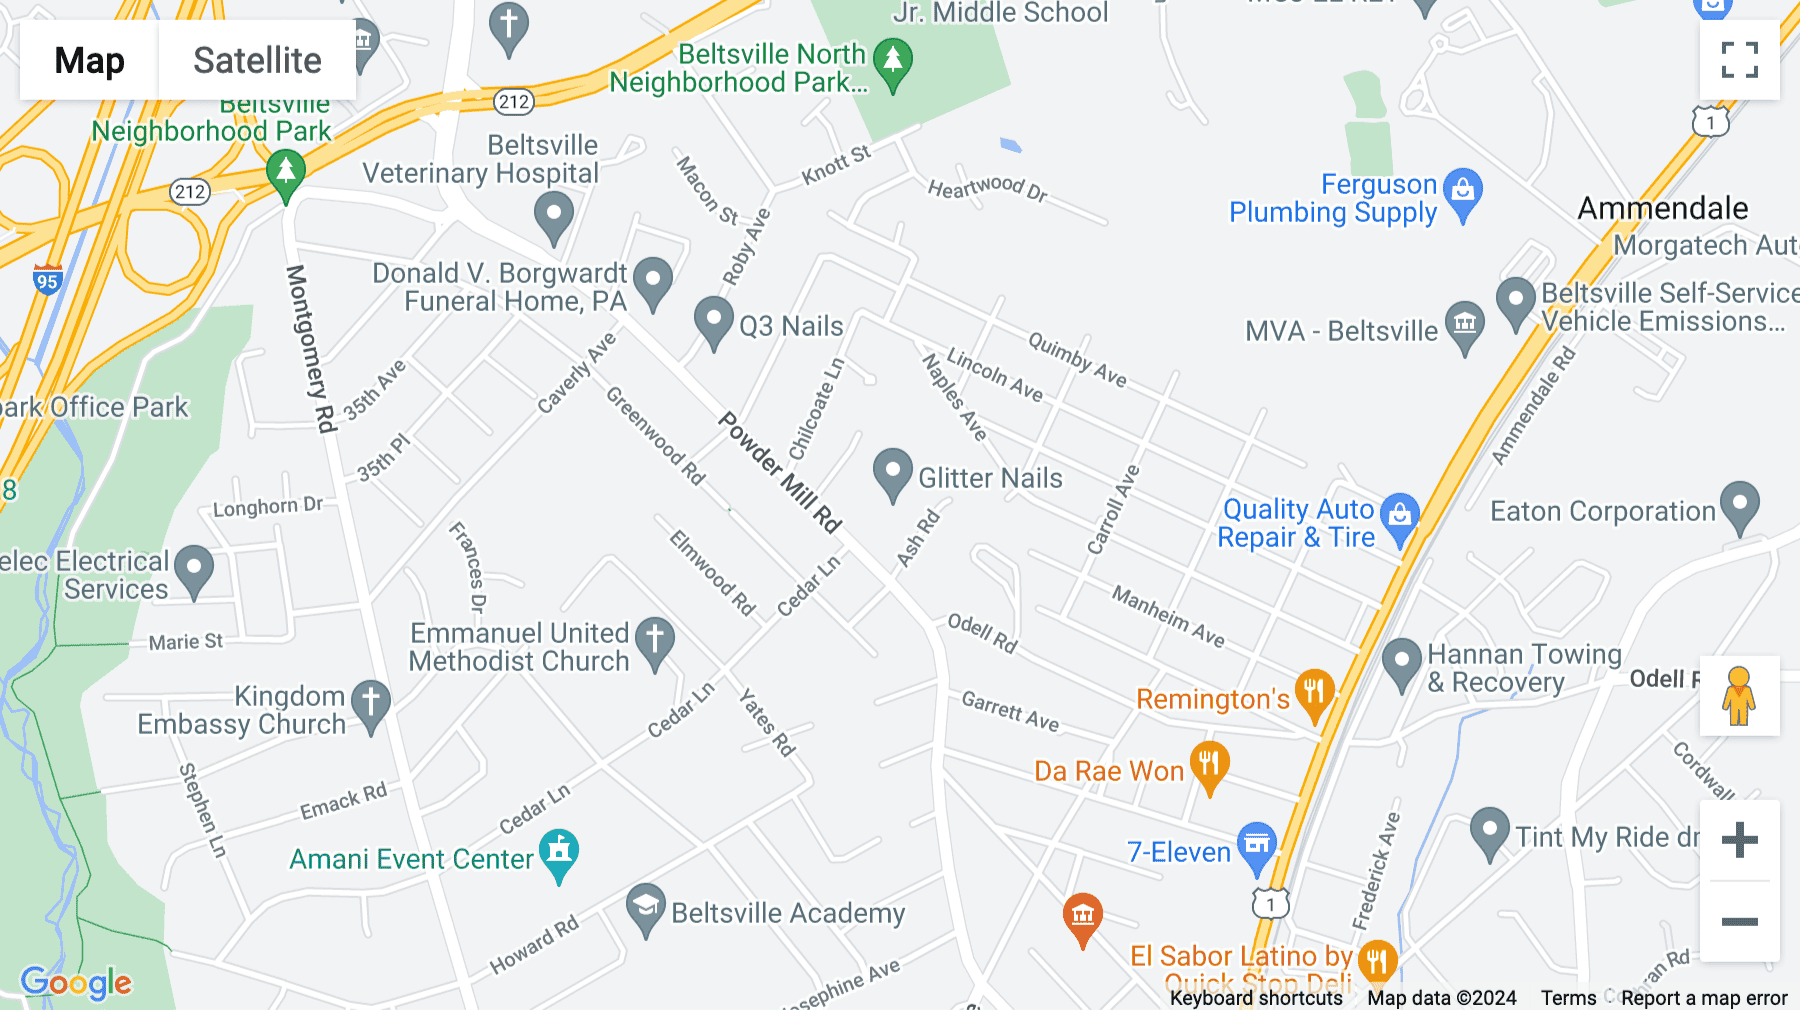 Click for interative map of 4600 Powder Mill Road, Suite 450, Beltsville